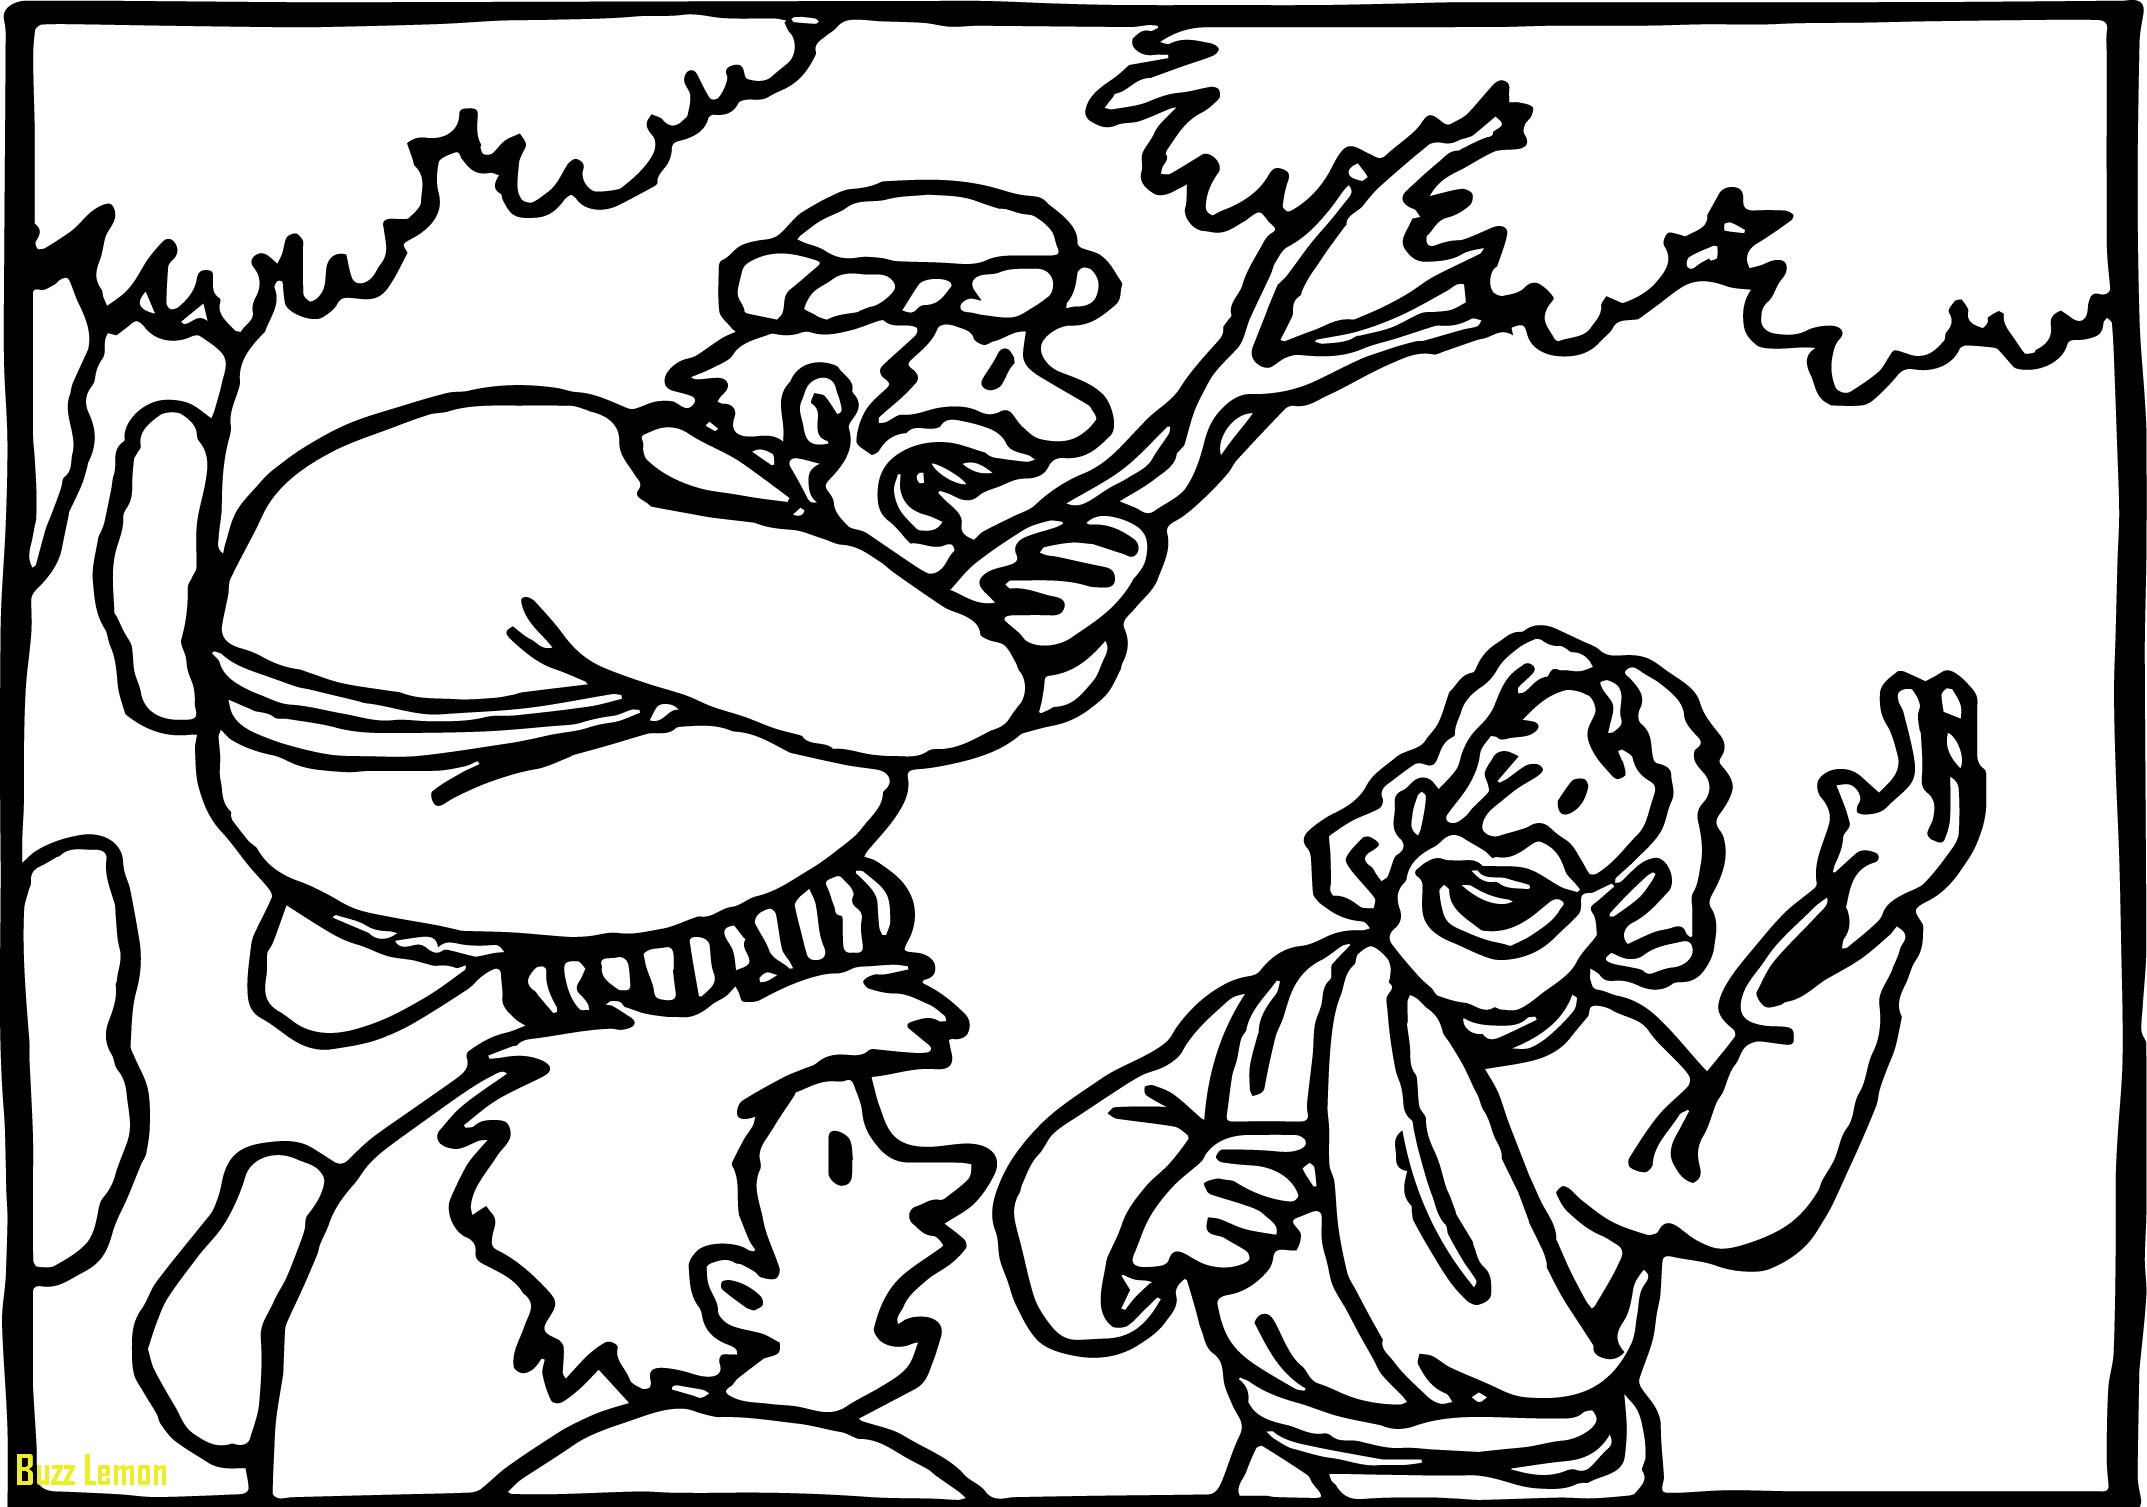 The best free Zacchaeus coloring page images. Download from 67 free